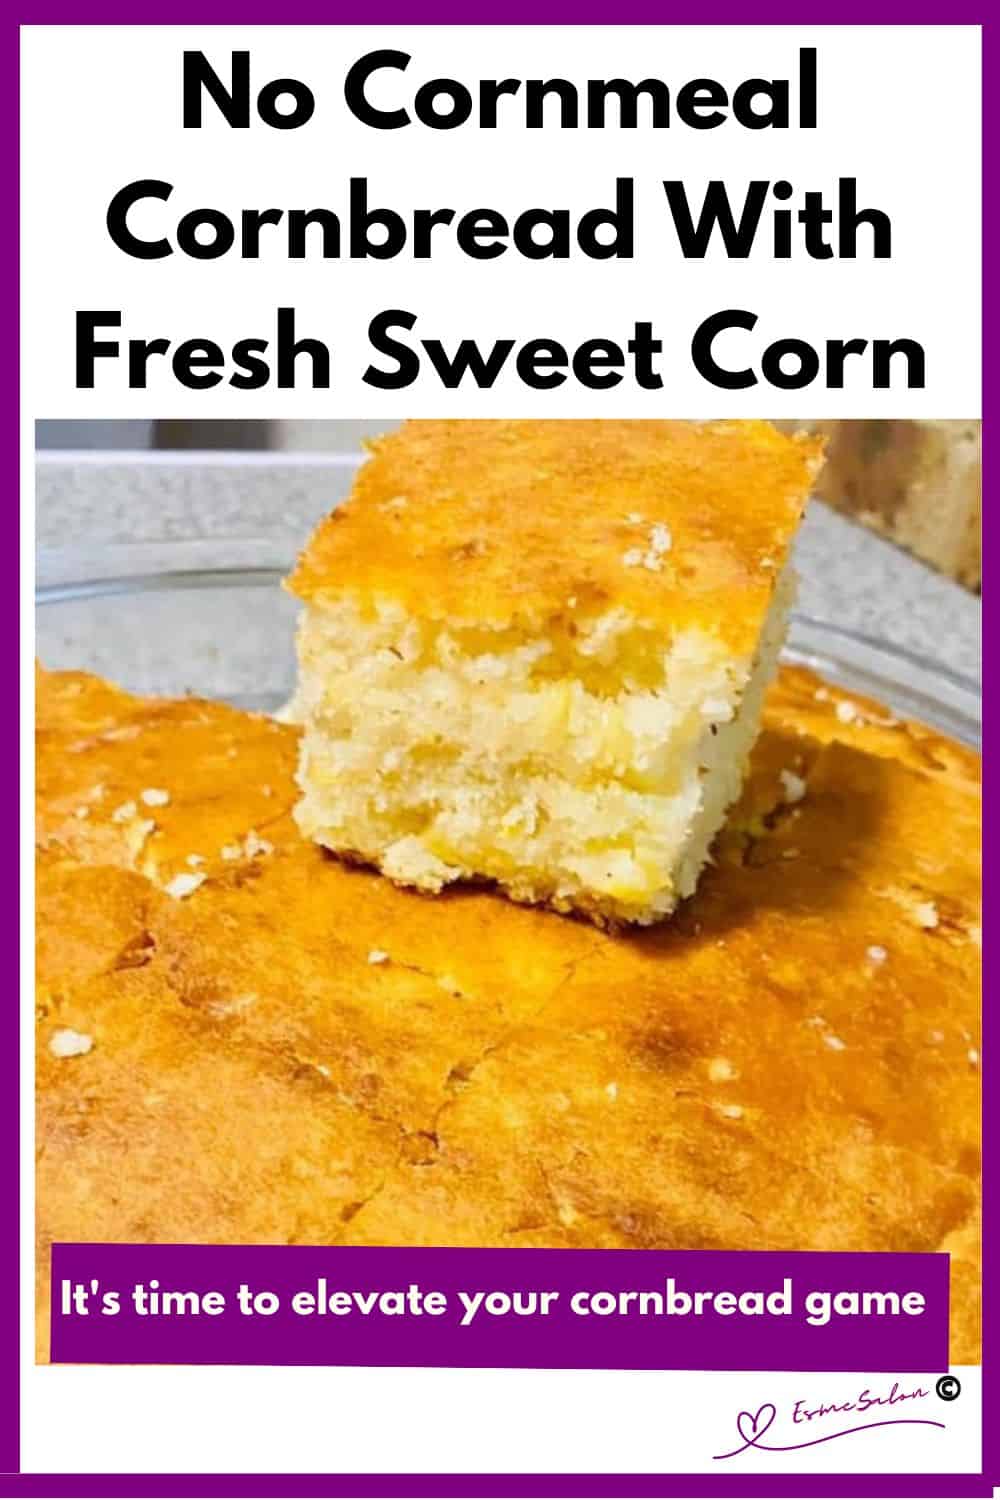 An image of a glass Pyrex dosh with cubes of Cornmeal Cornbread with Fresh Sweet Corn